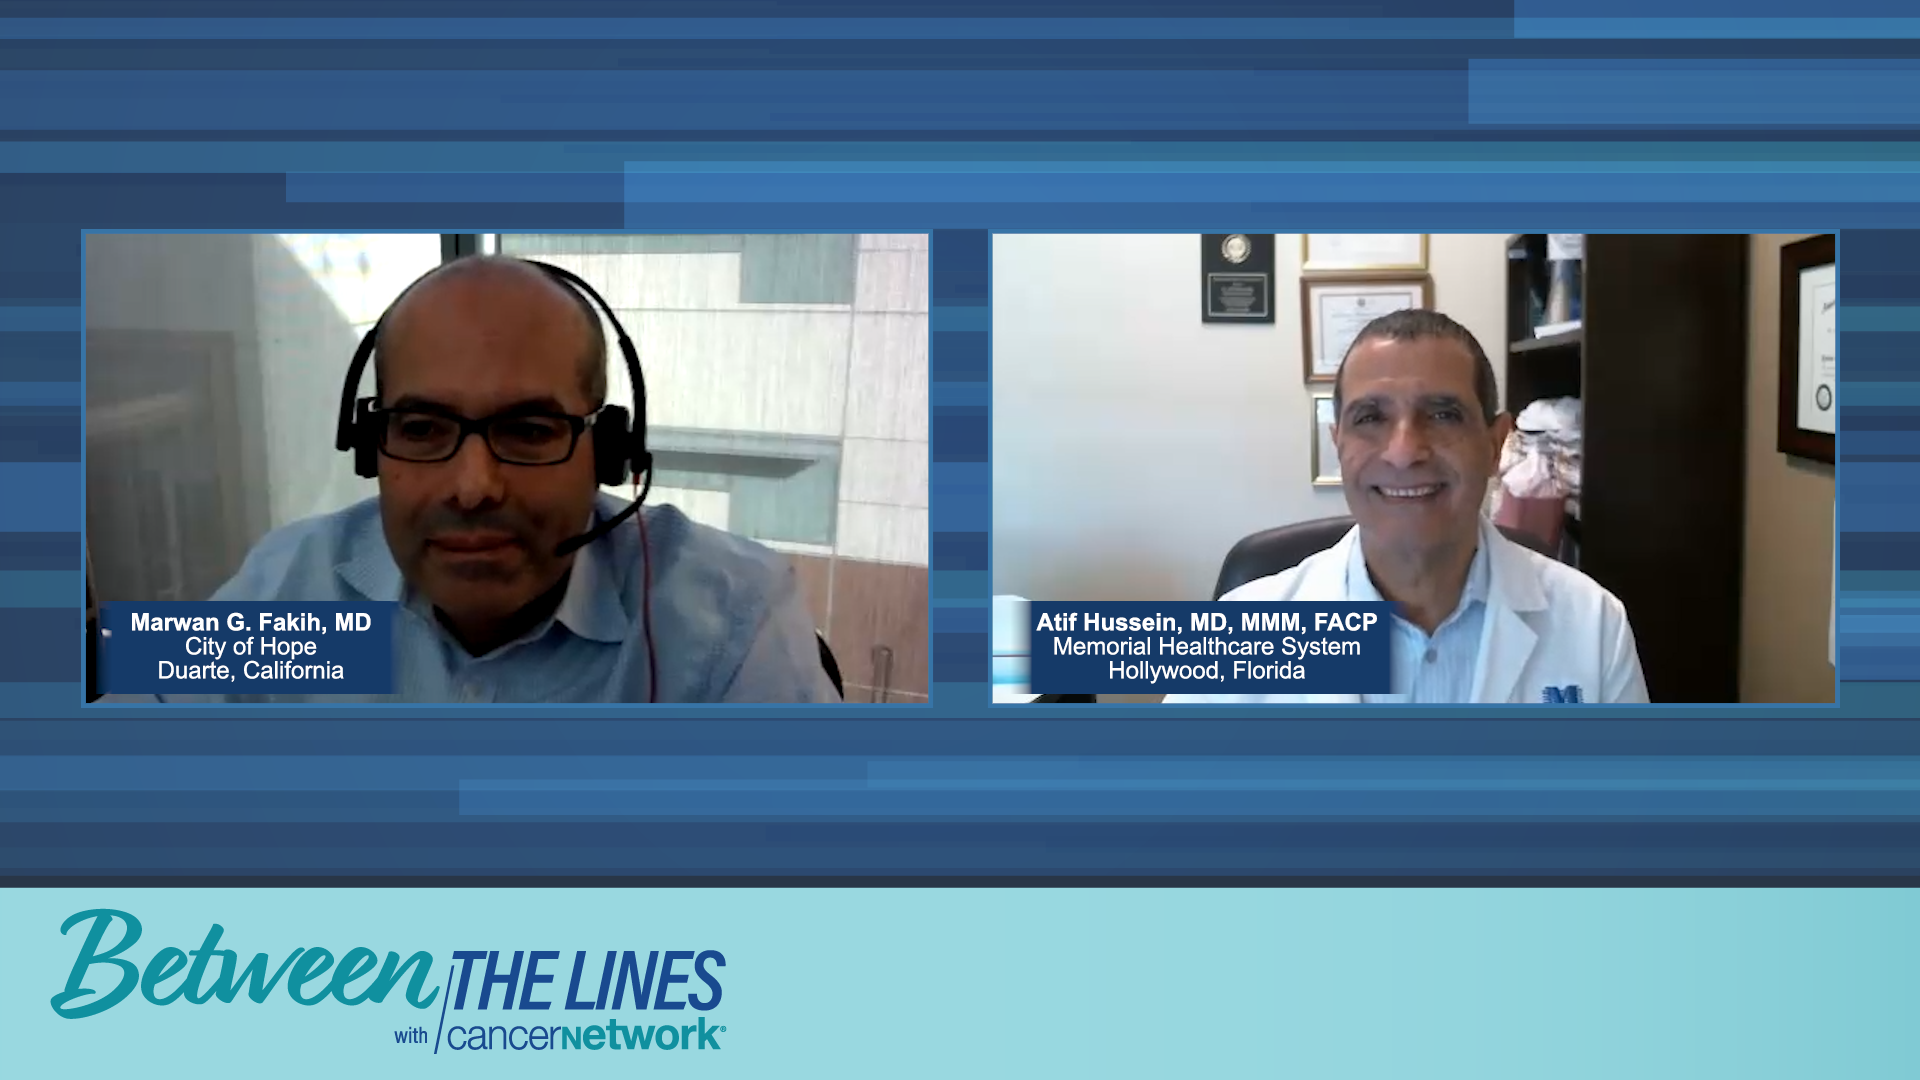 Marwan G. Fakih, MD, and Atif Hussein, MD, MMM, FACP, experts on colorectal cancer